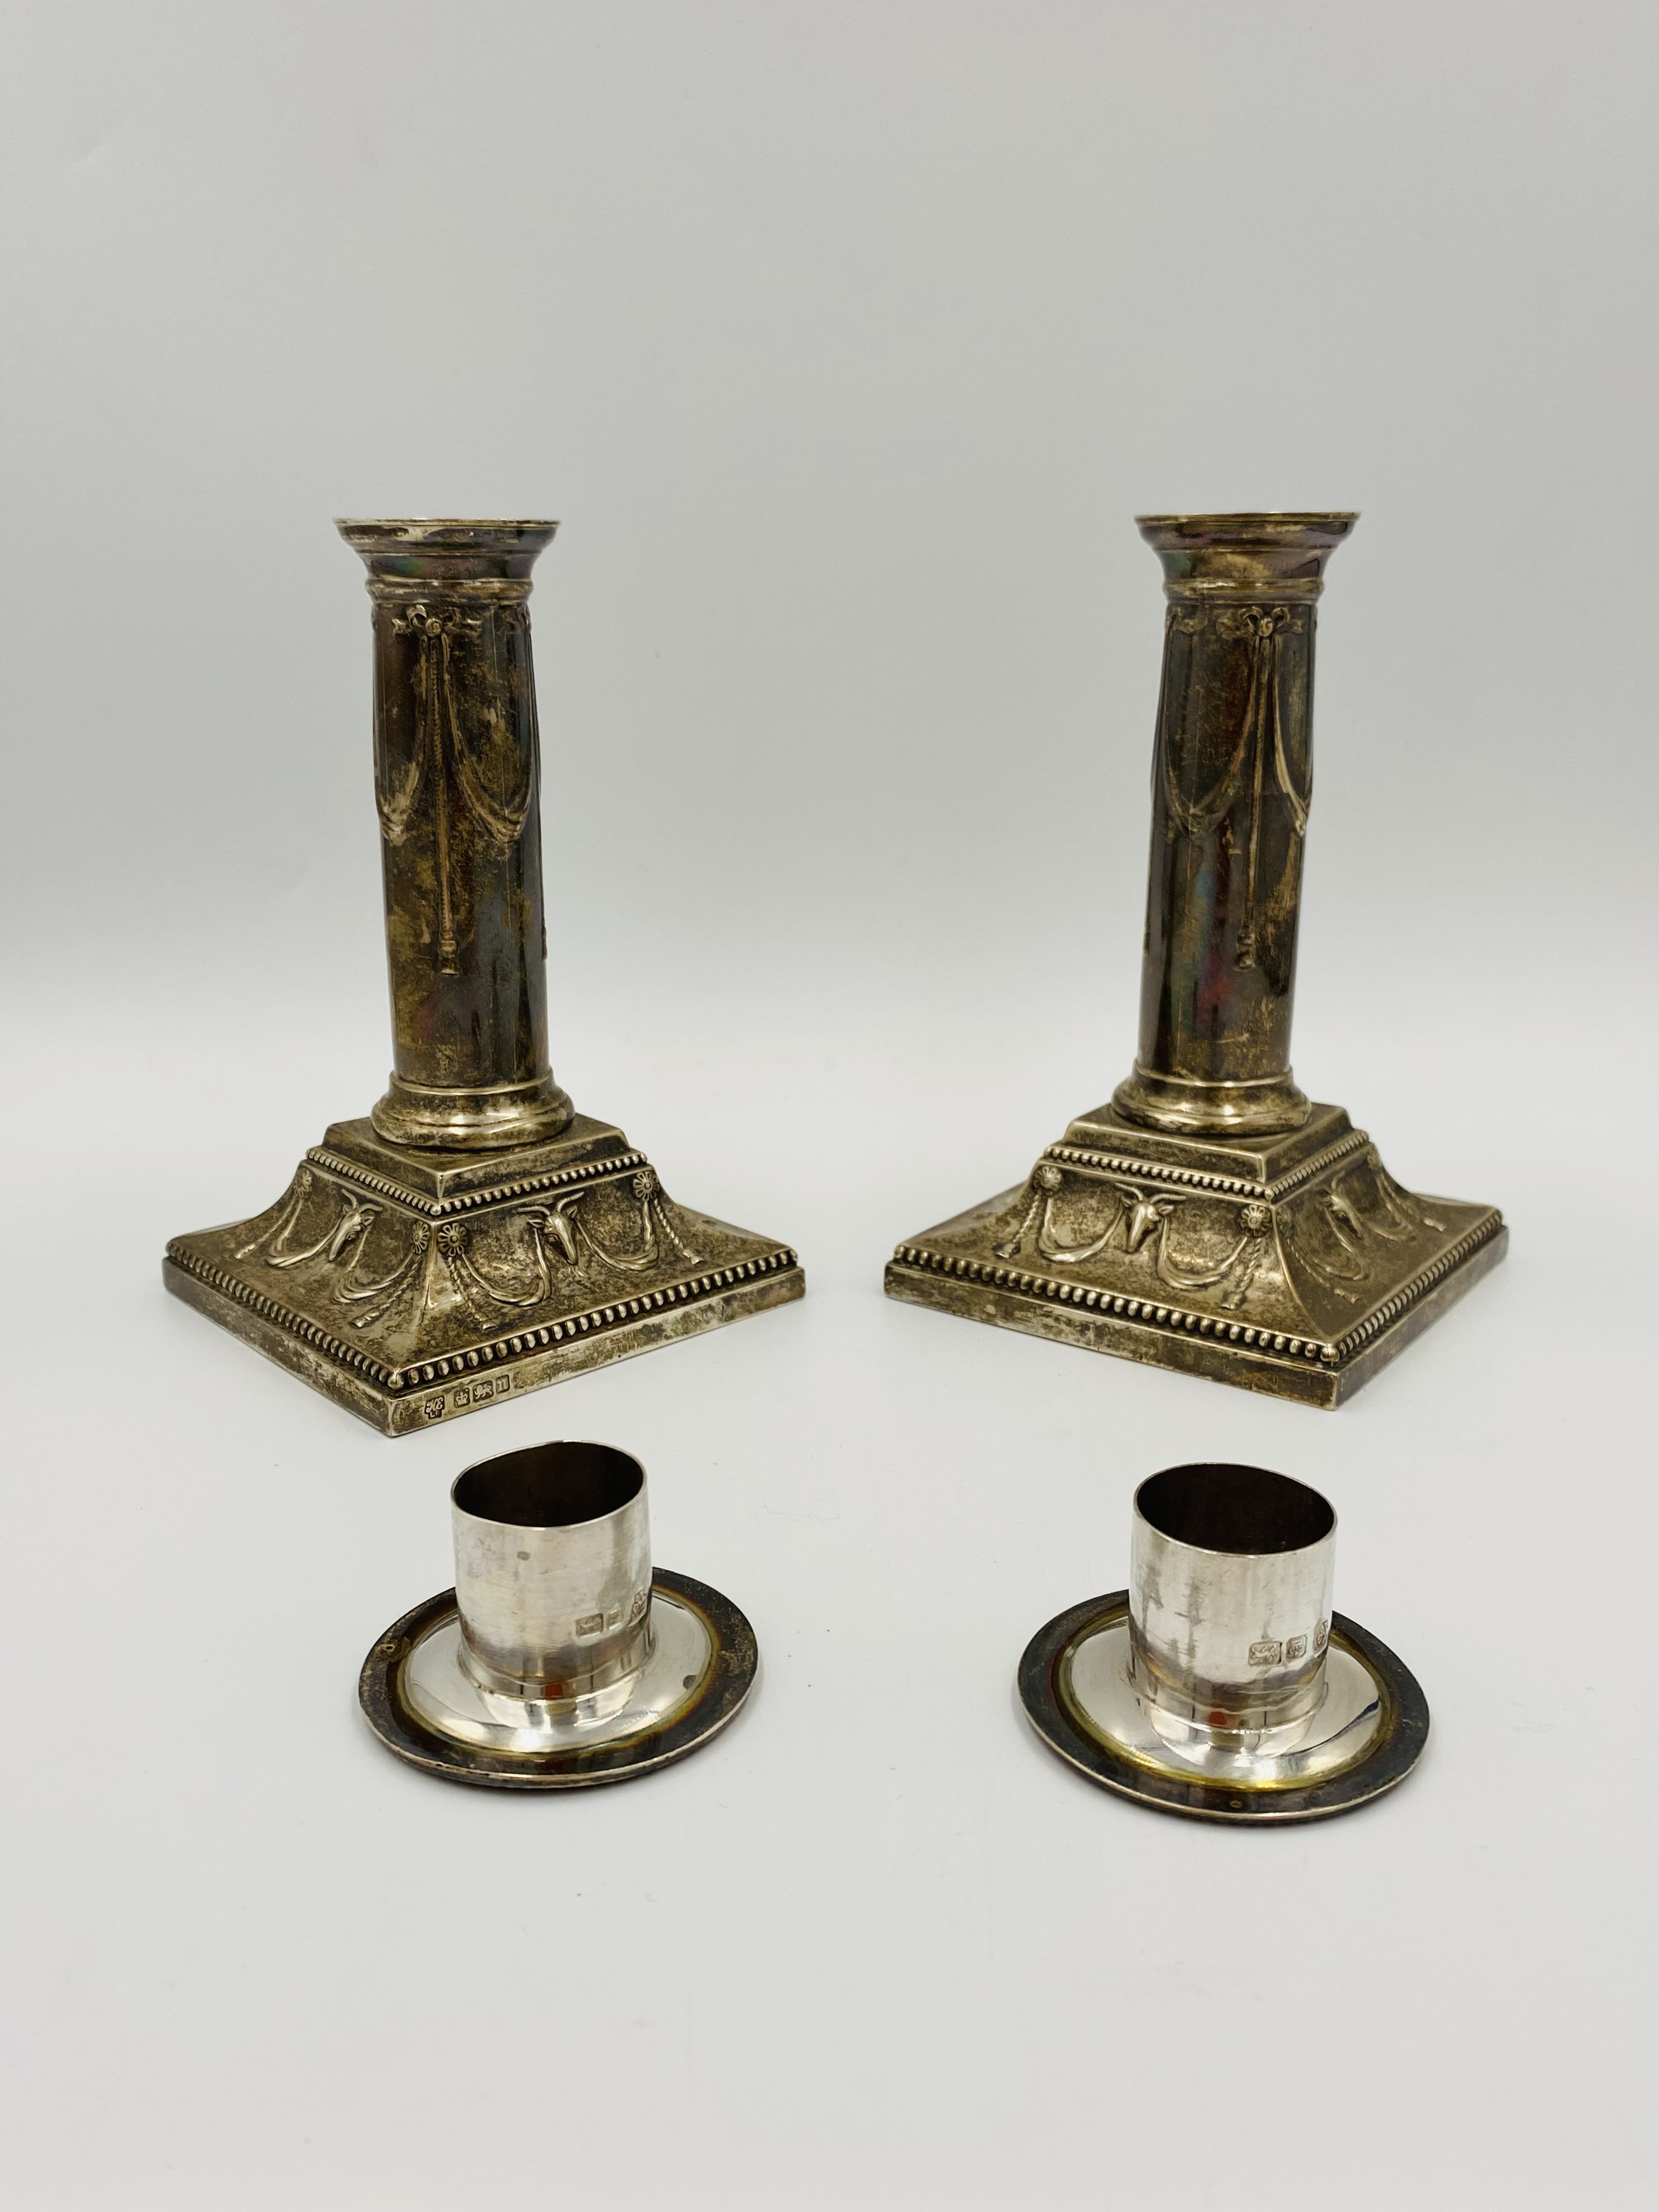 Pair of filled silver candlesticks - Image 4 of 5